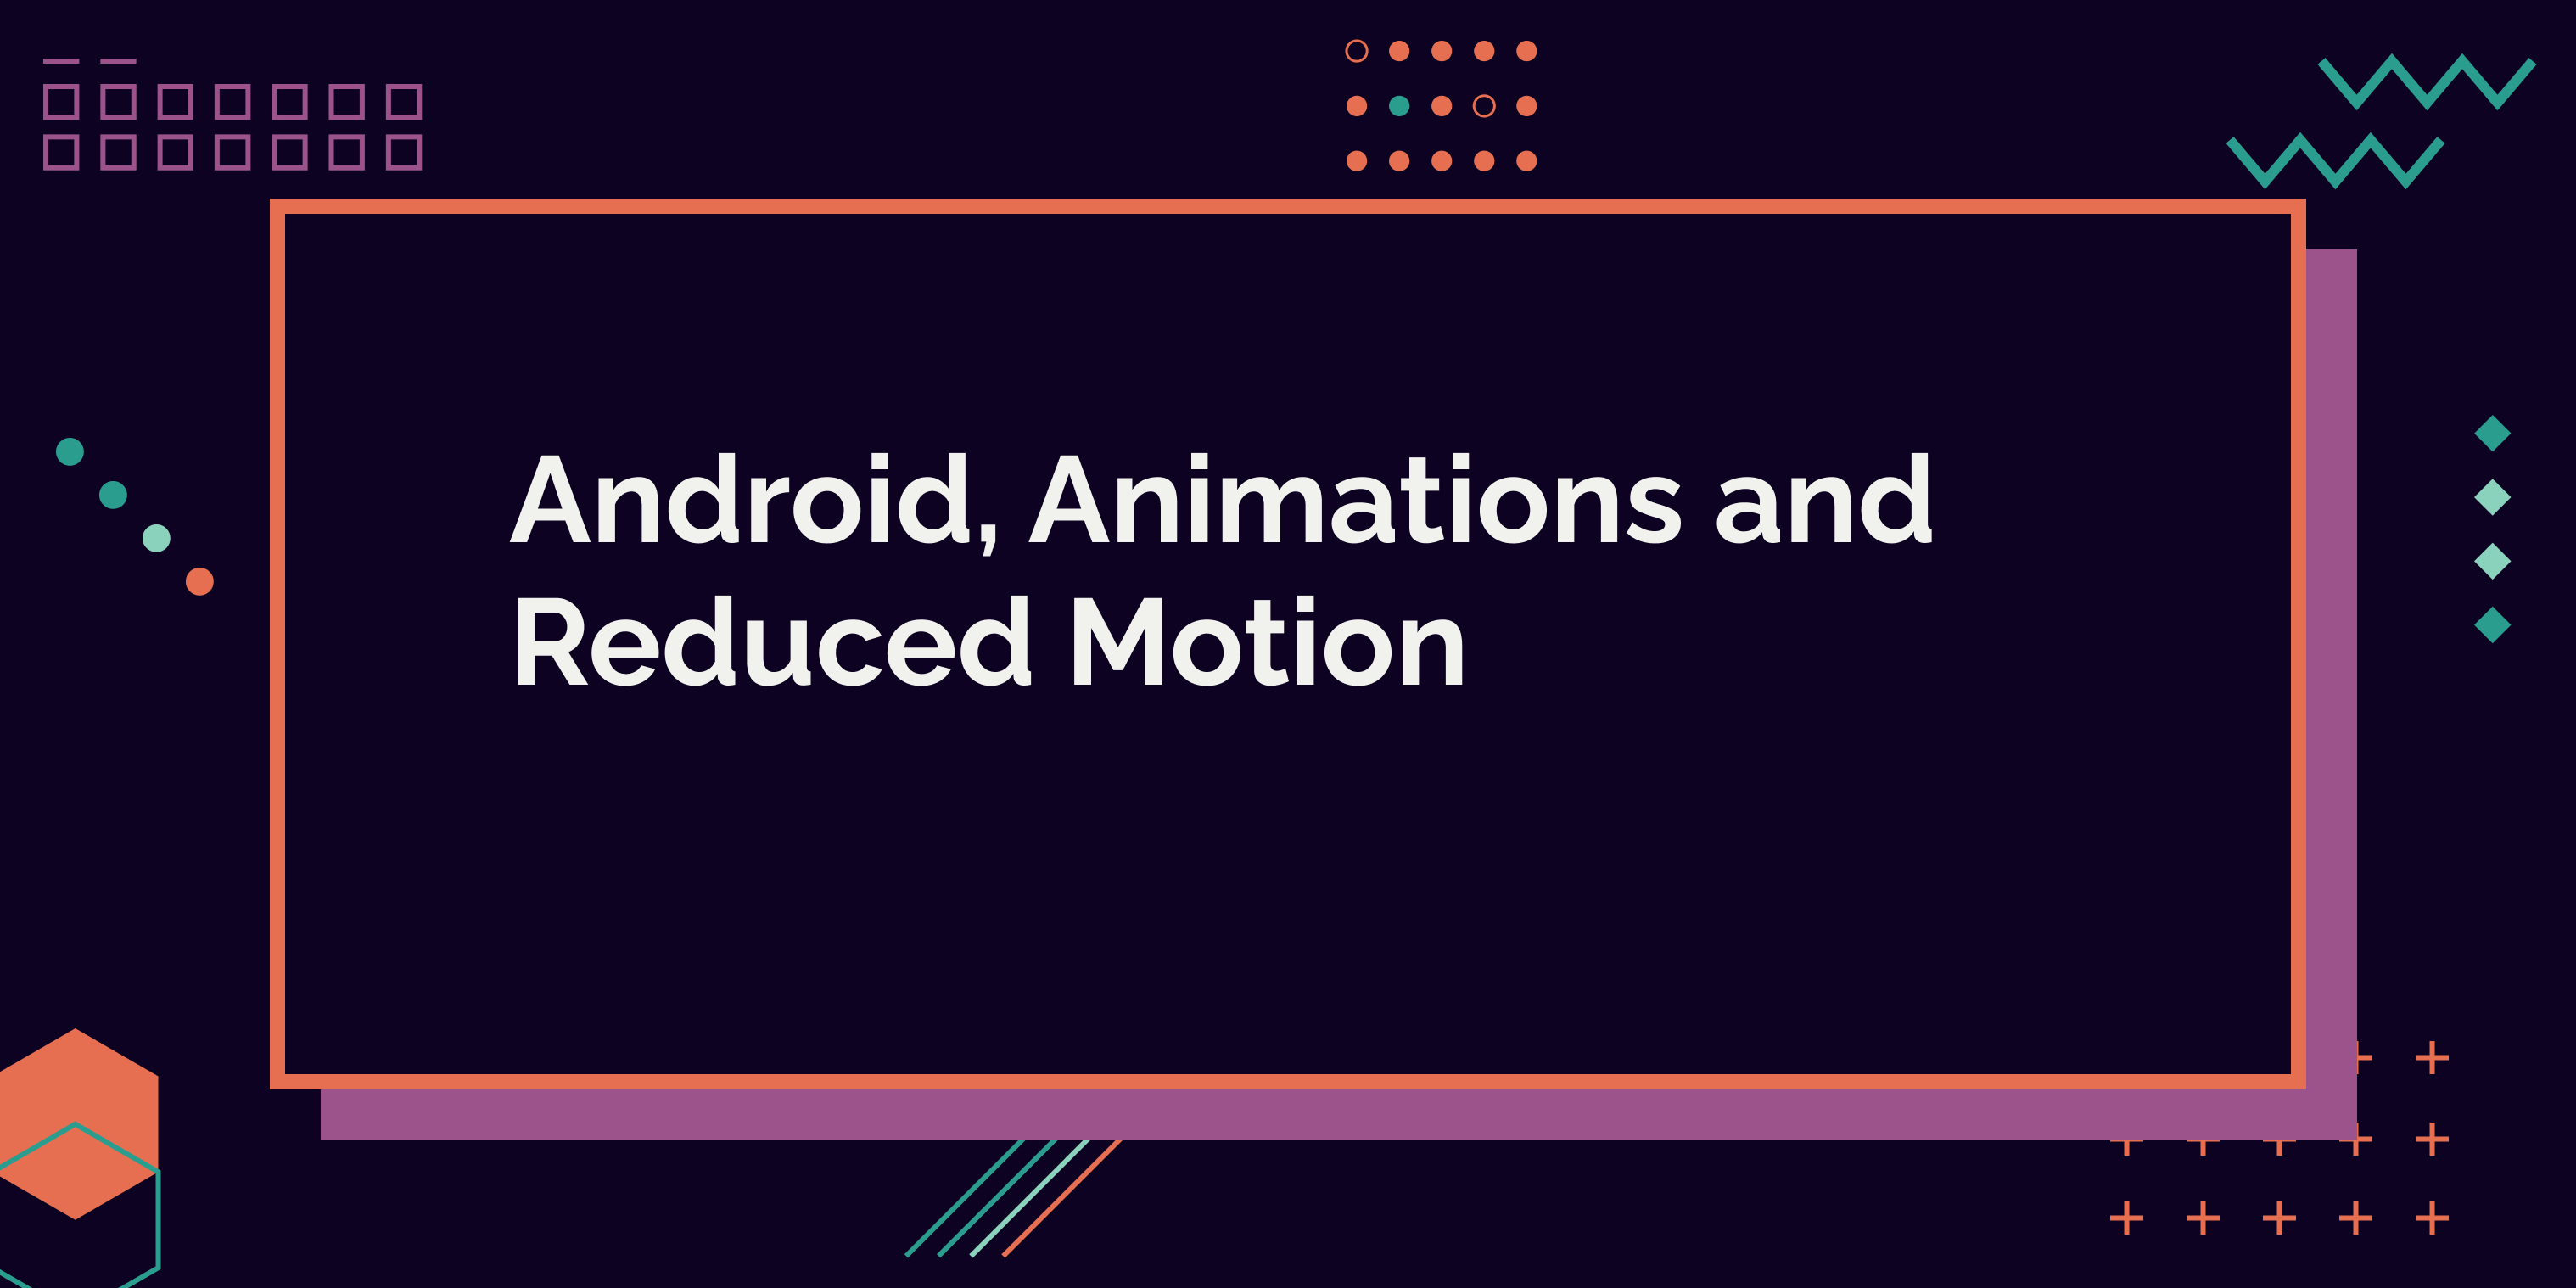 Android, Animations and Reduced Motion.